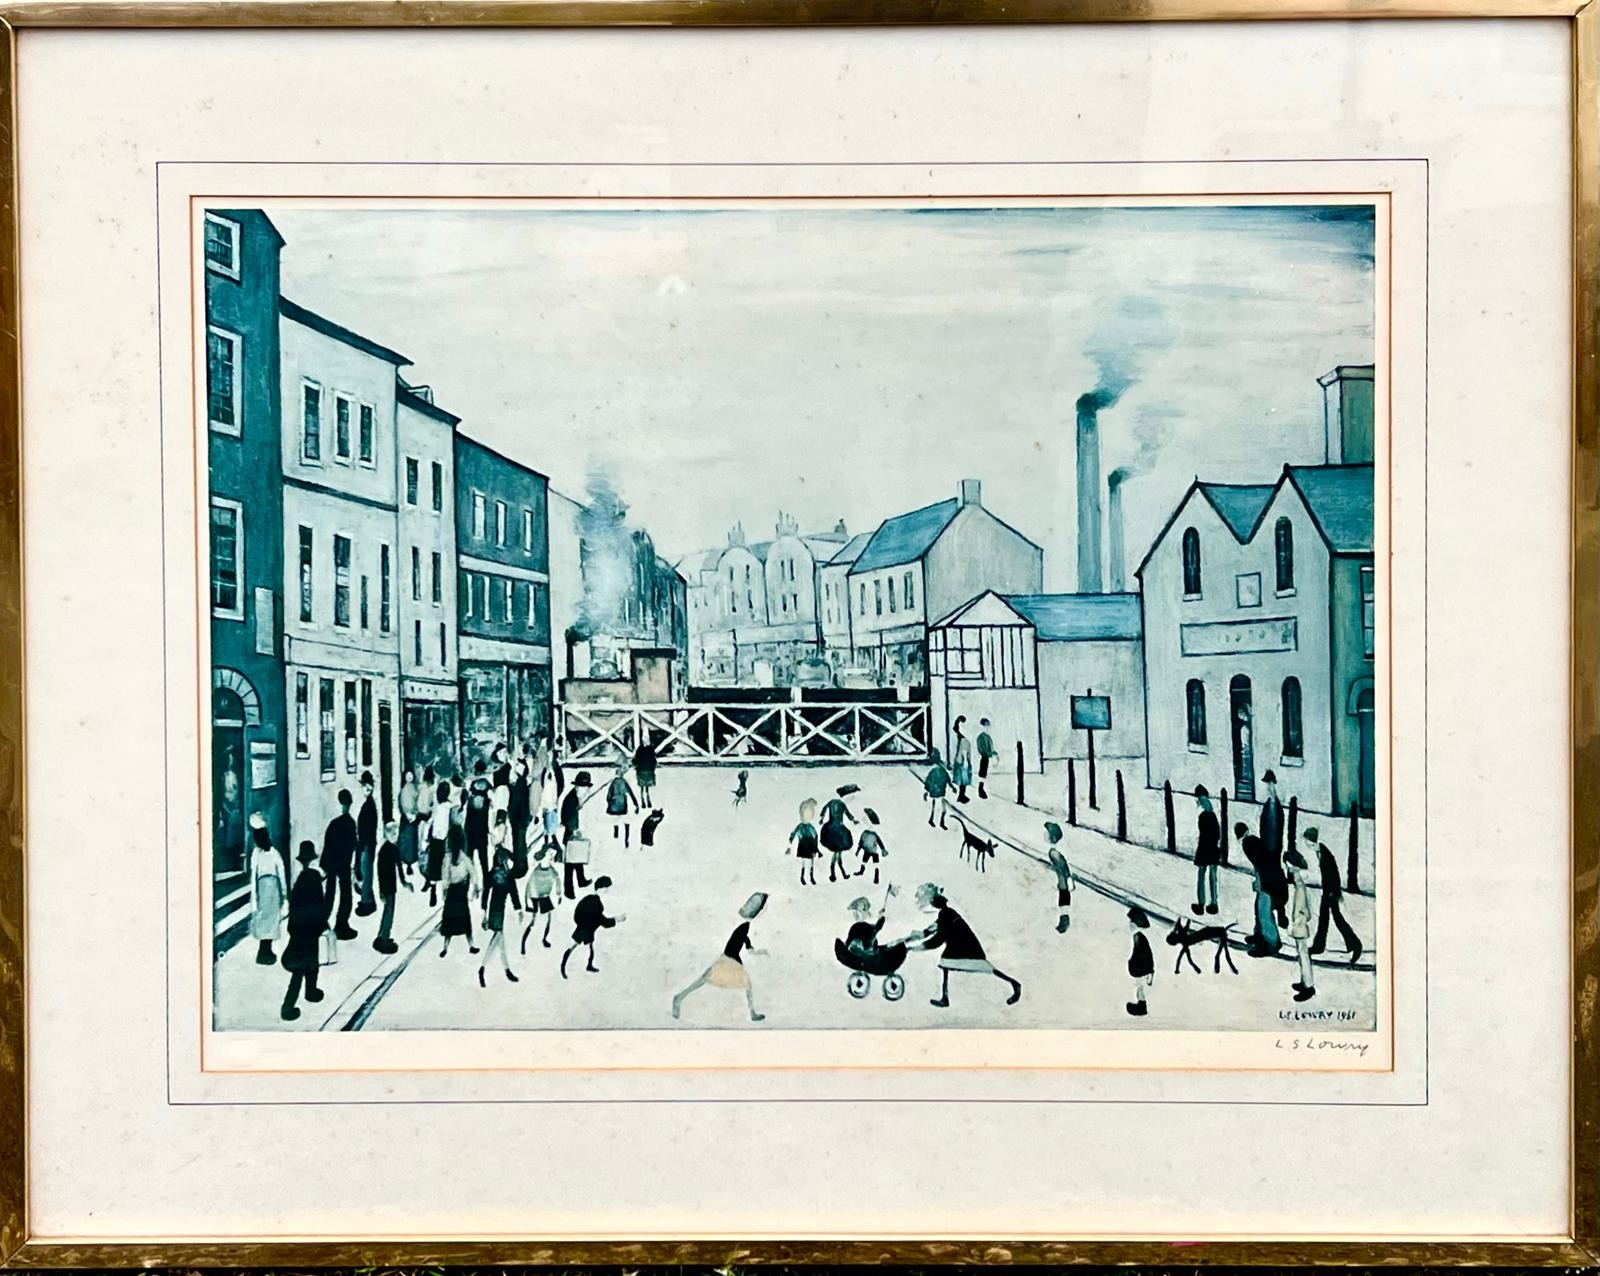 LS LOWRY, OFFSET LITHOGRAPH, THE CROSSING, APPROX 41 x 57cm